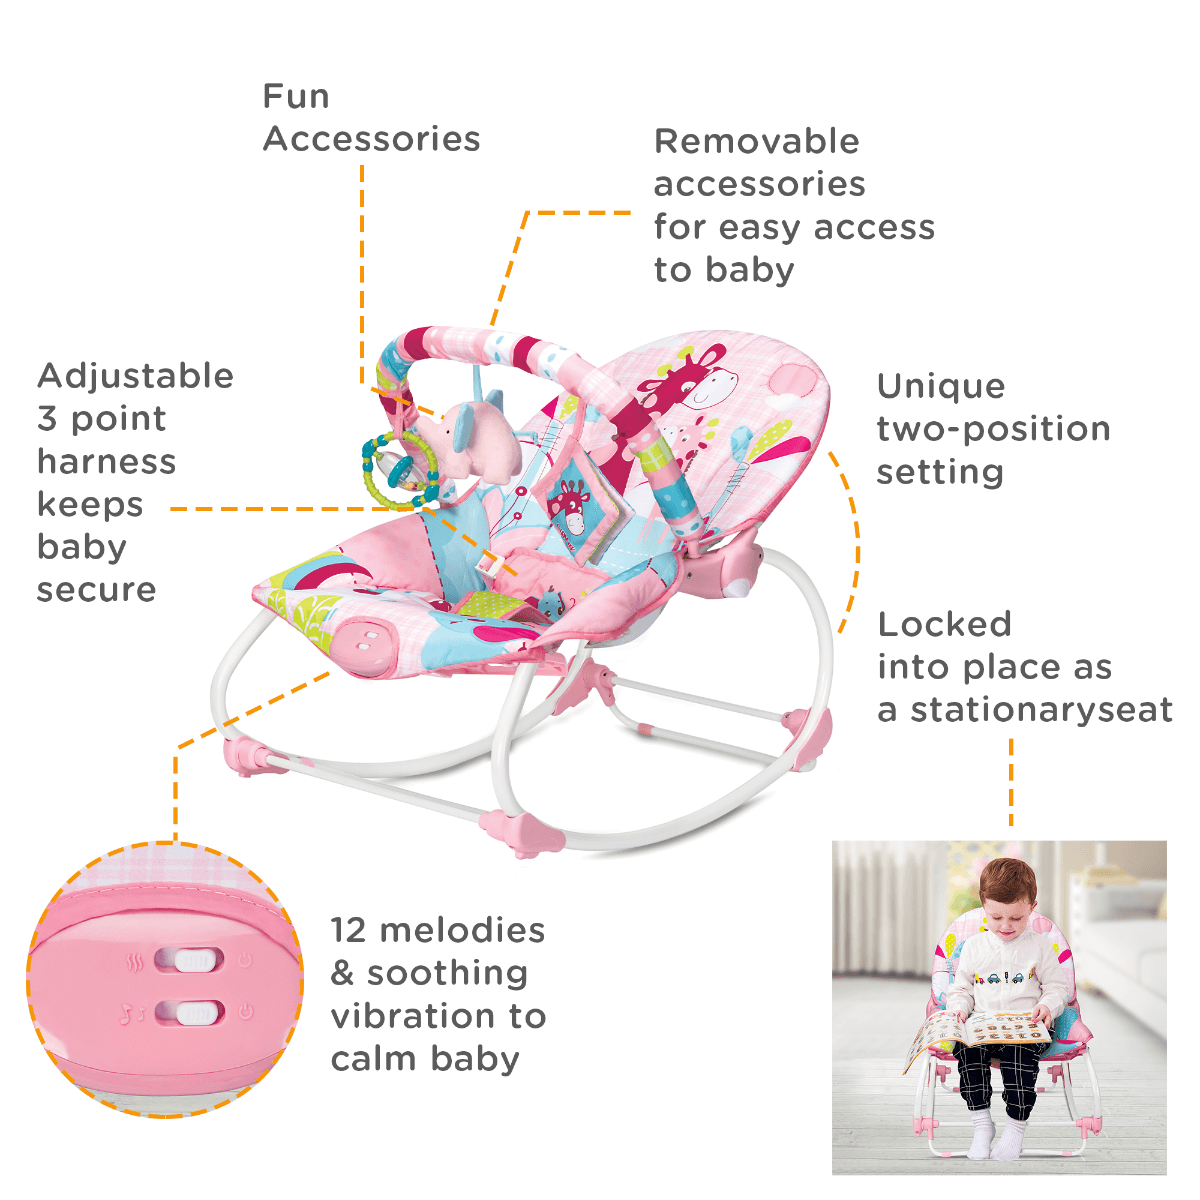 Mastela Baby Rocker Baby Pink P2 - For Ages 0-3 Years